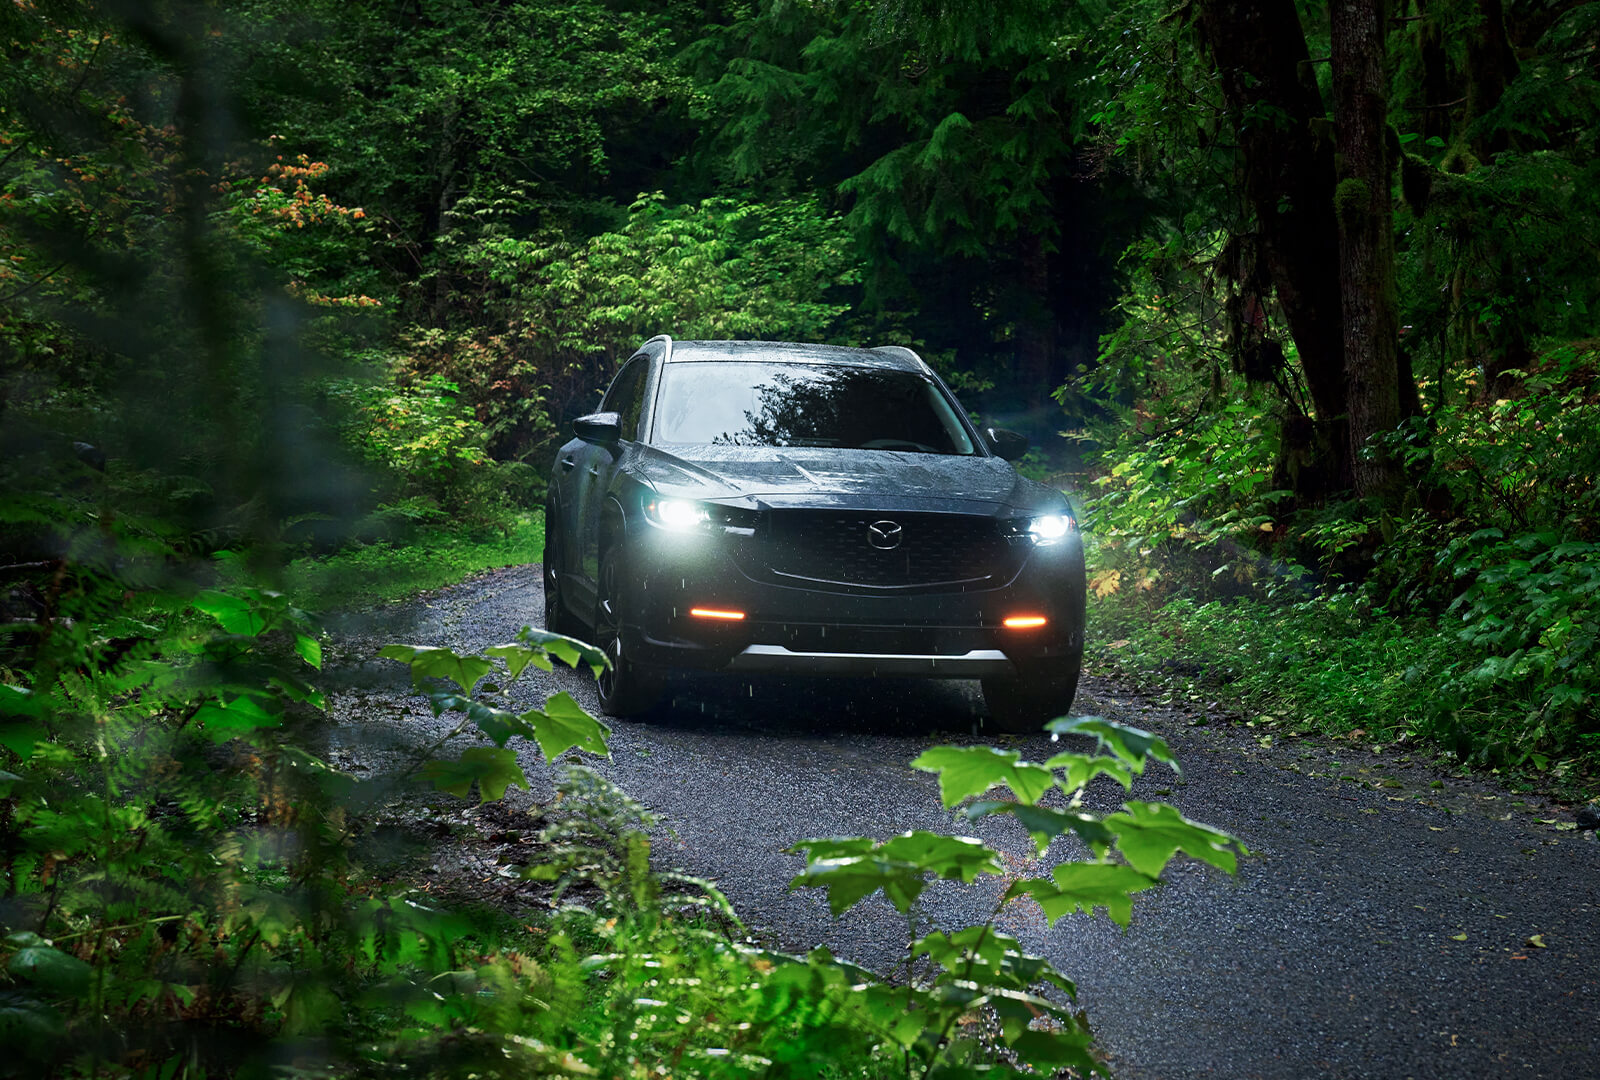 Mazda CX-50 approaches after rounding a curve on a gravel road in dense forest.